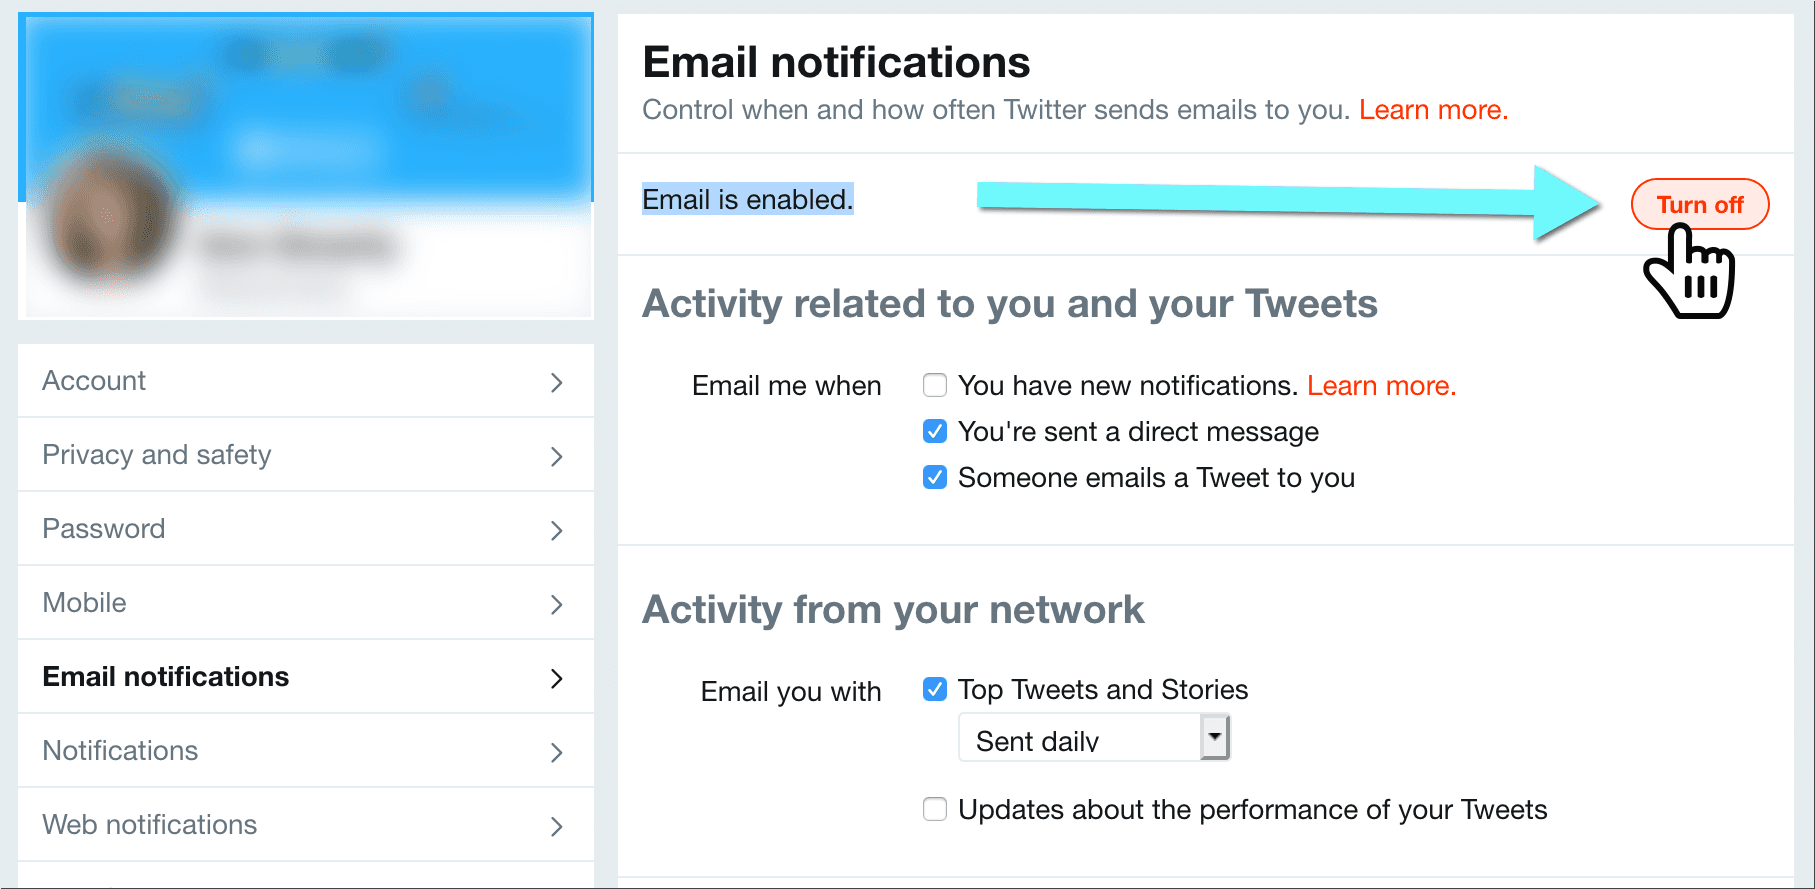 How to Stop Getting Emails from Twitter on a Desktop Browser